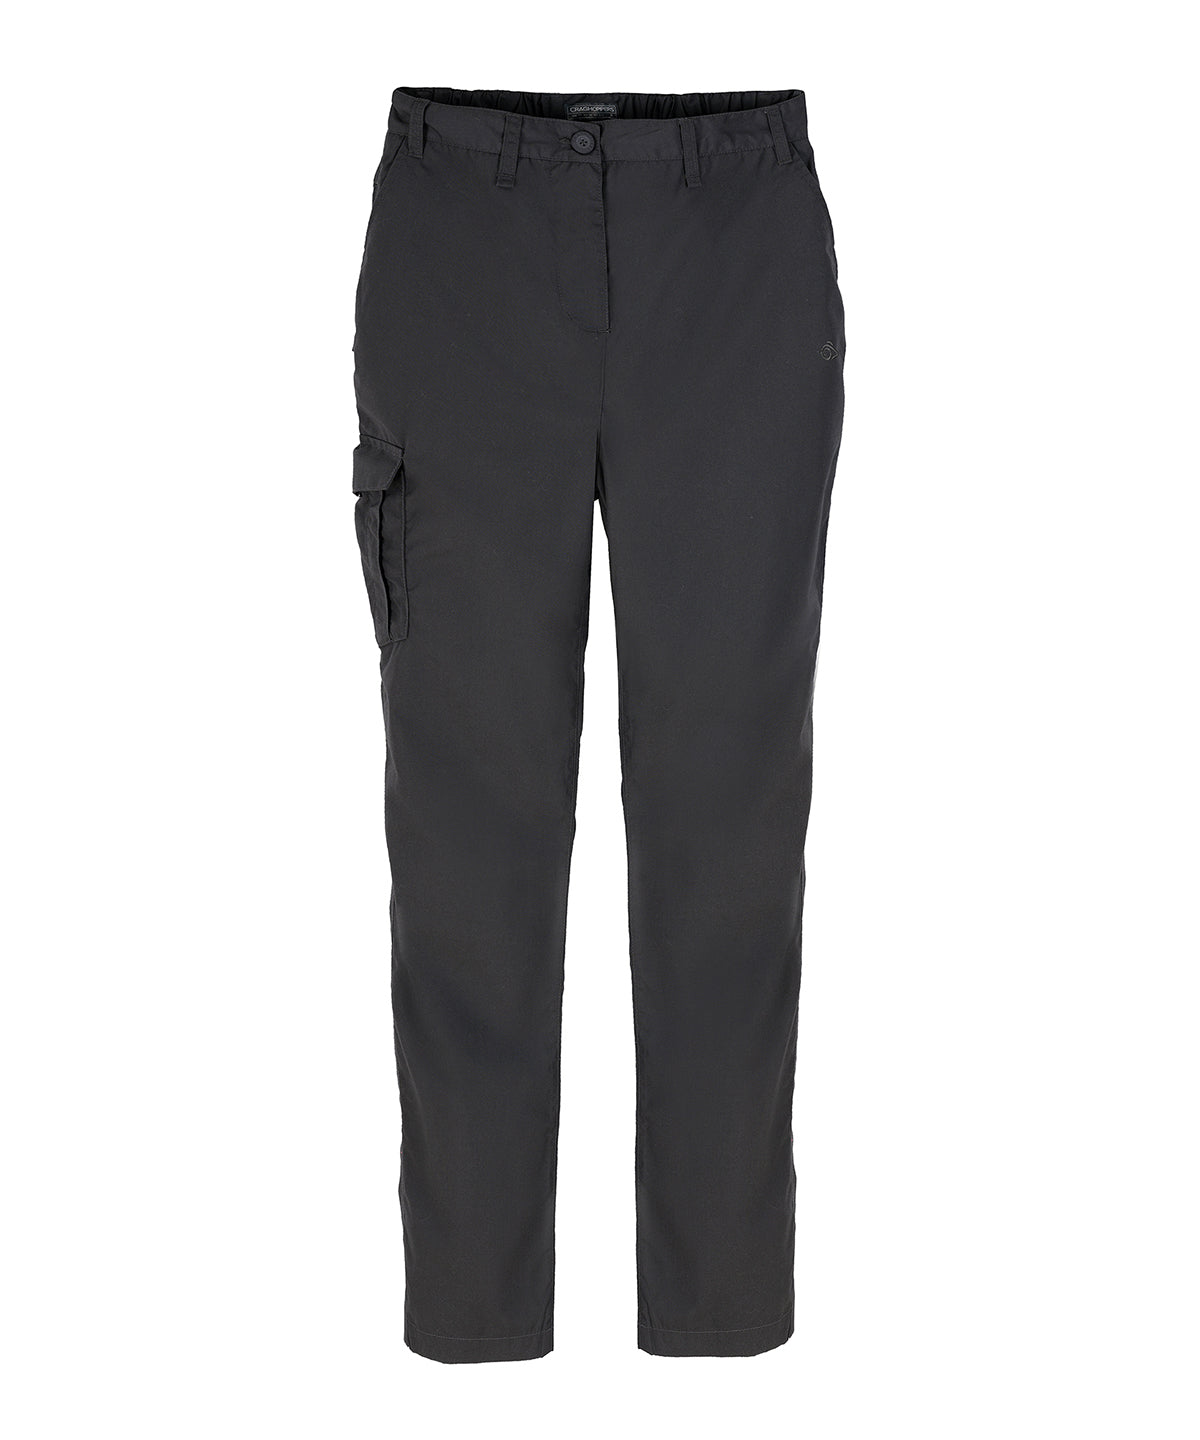 Personalised Trousers - Black Craghoppers Expert women’s Kiwi trousers